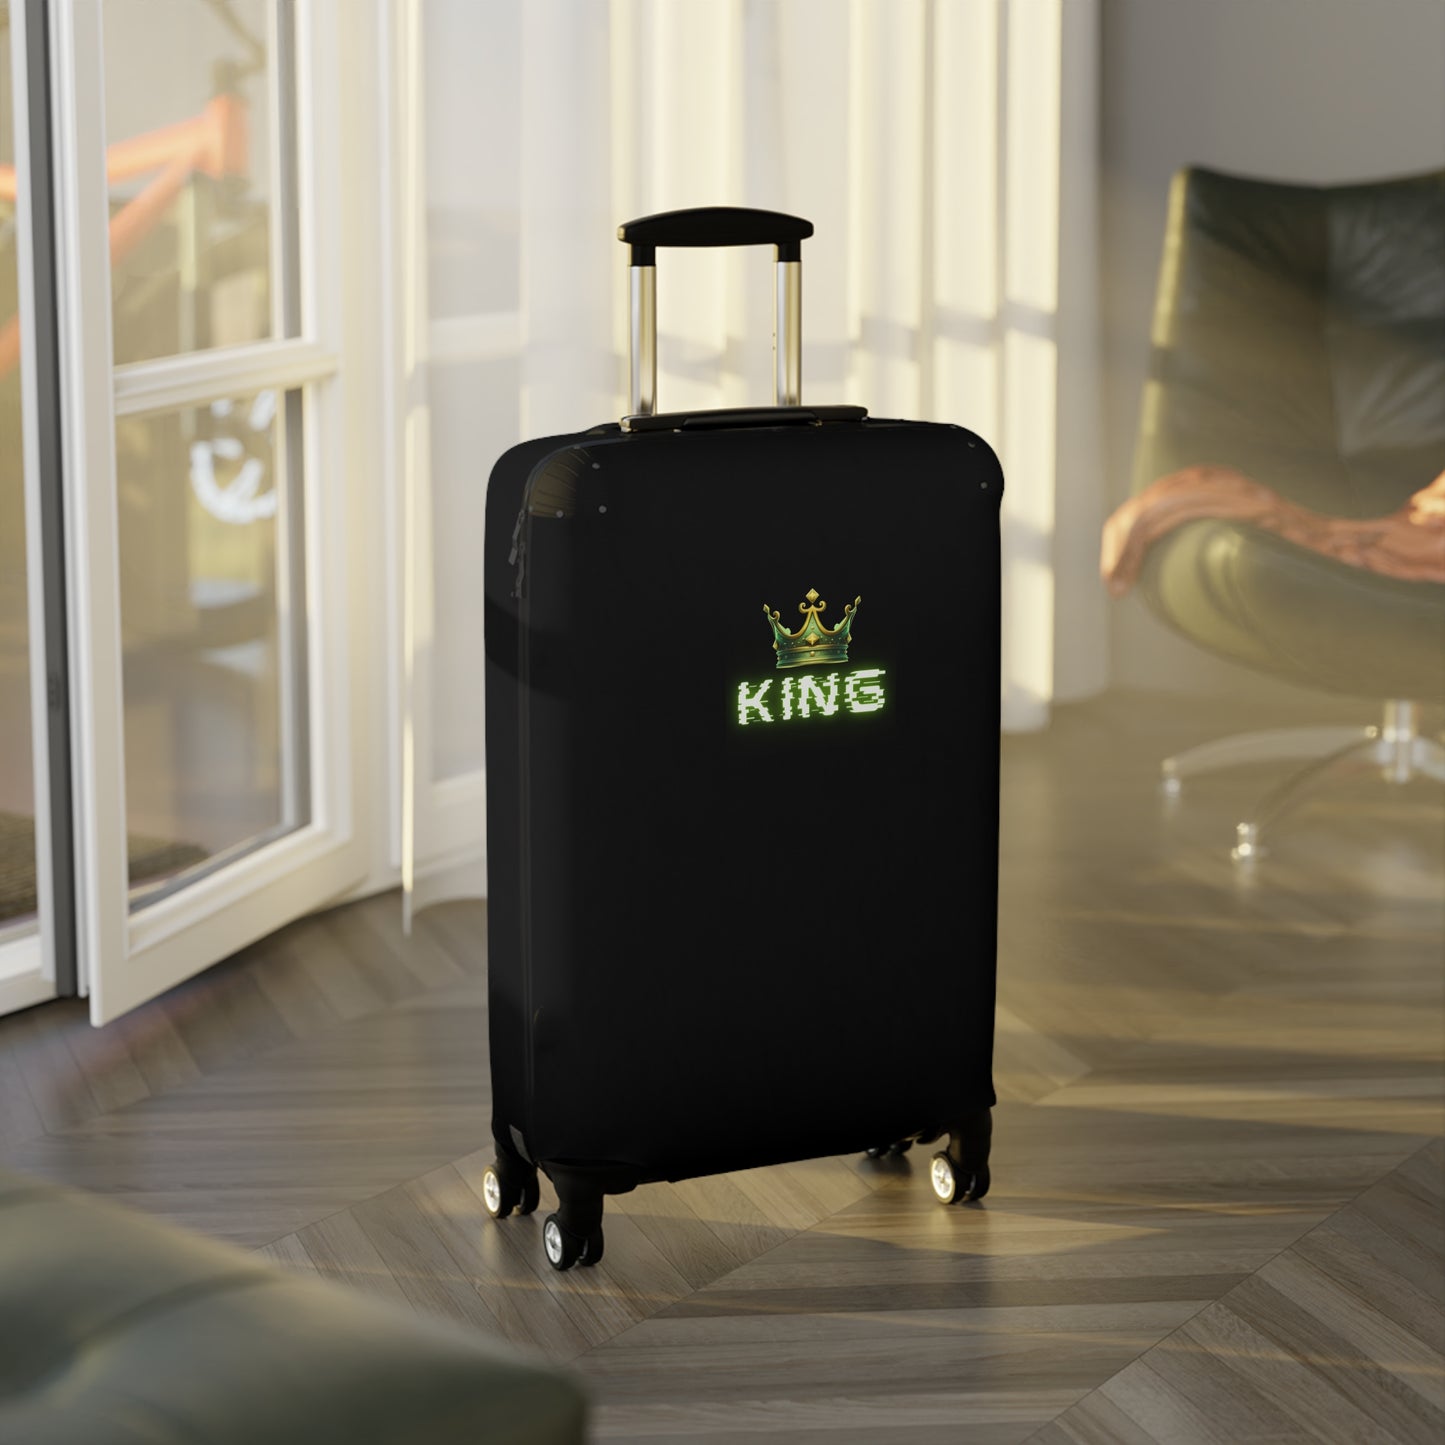 King Luggage Cover From BFT By Schatar